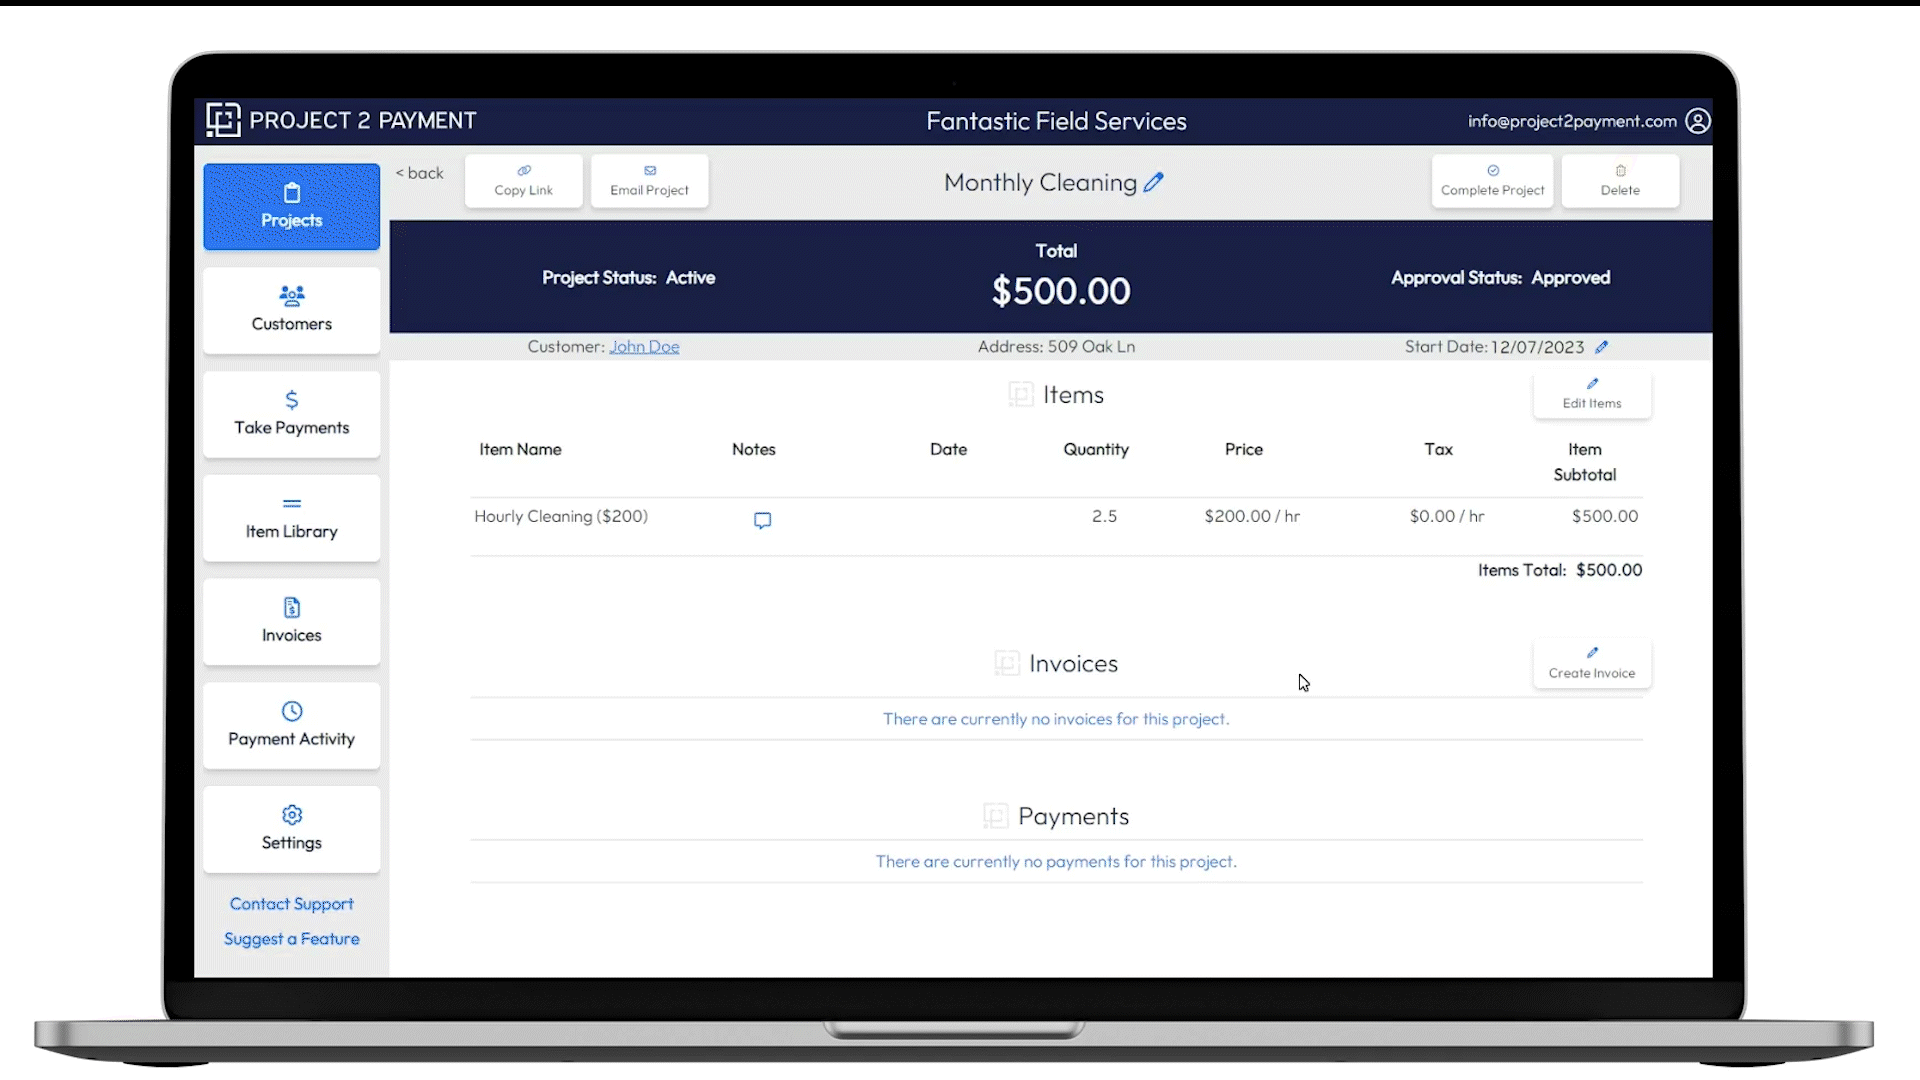 Can an estimate be used as an invoice? Easily convert an estimate to an invoice with Project 2 Payment.